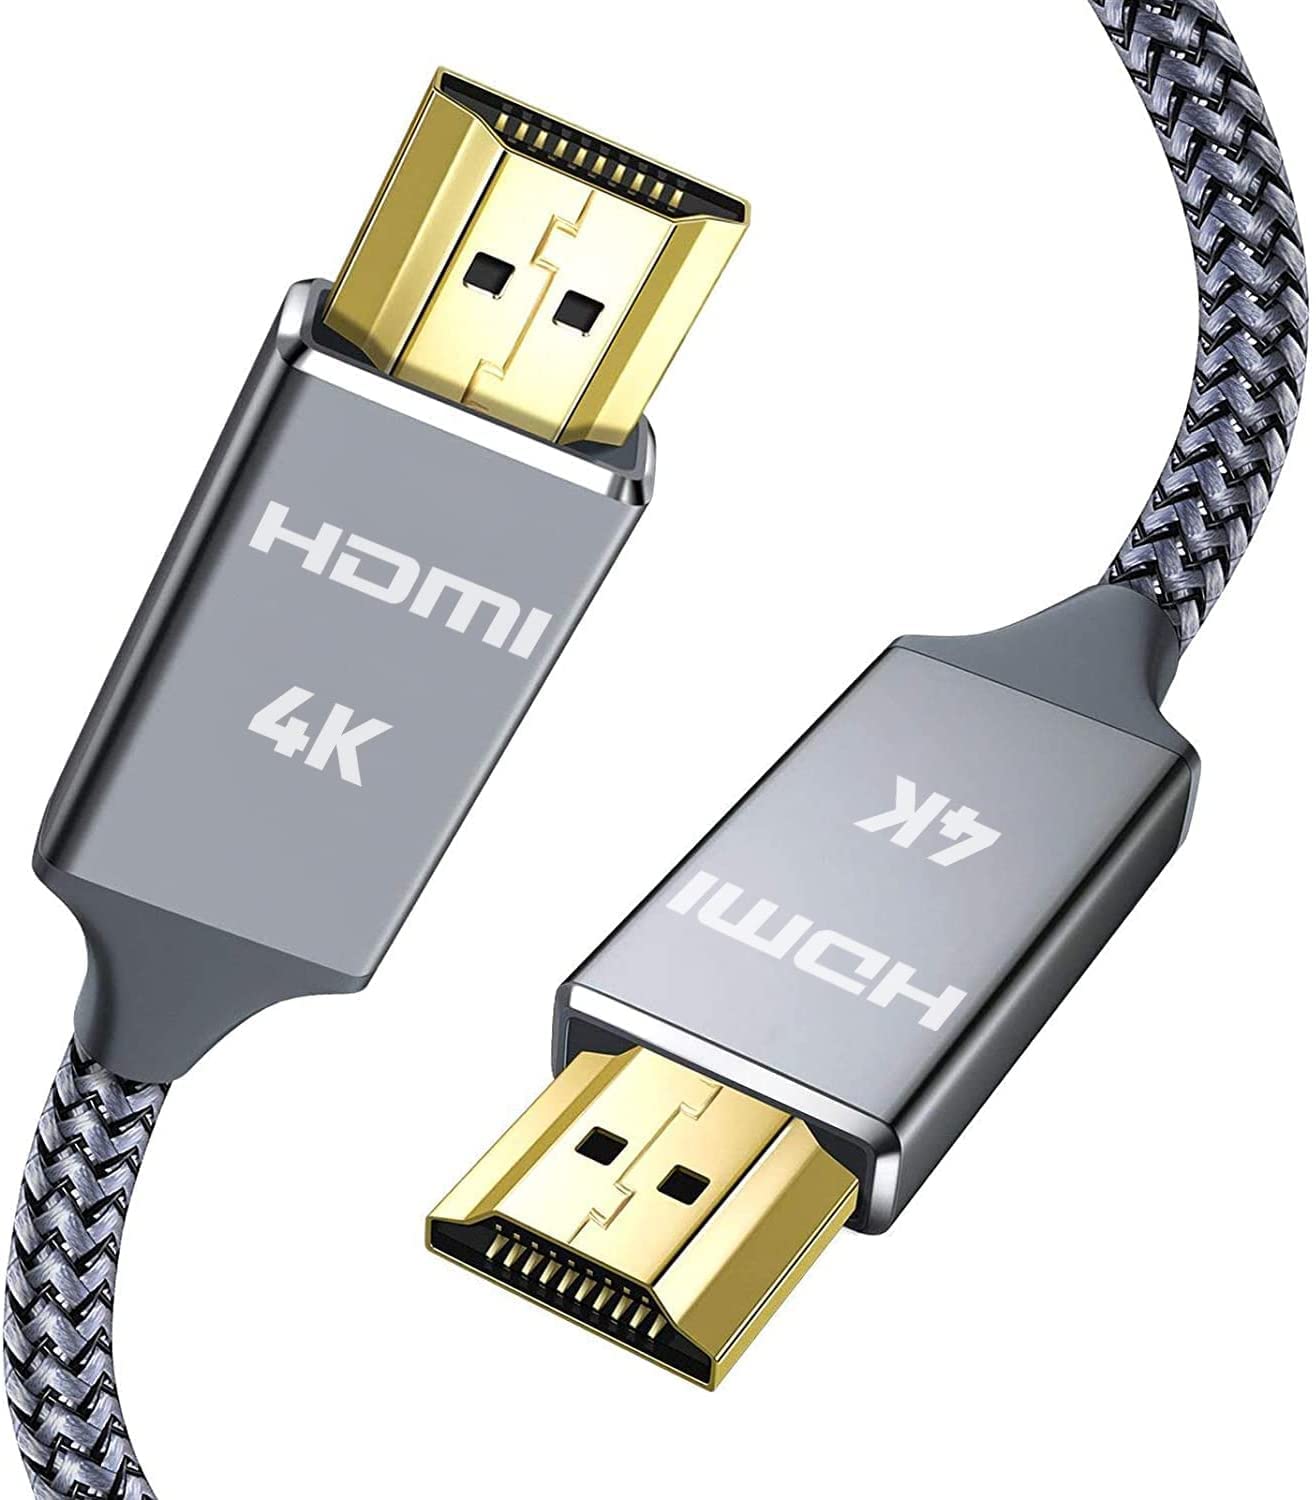 Replace the HDMI cable with a new one.
Ensure TV compatibility by checking the specifications.